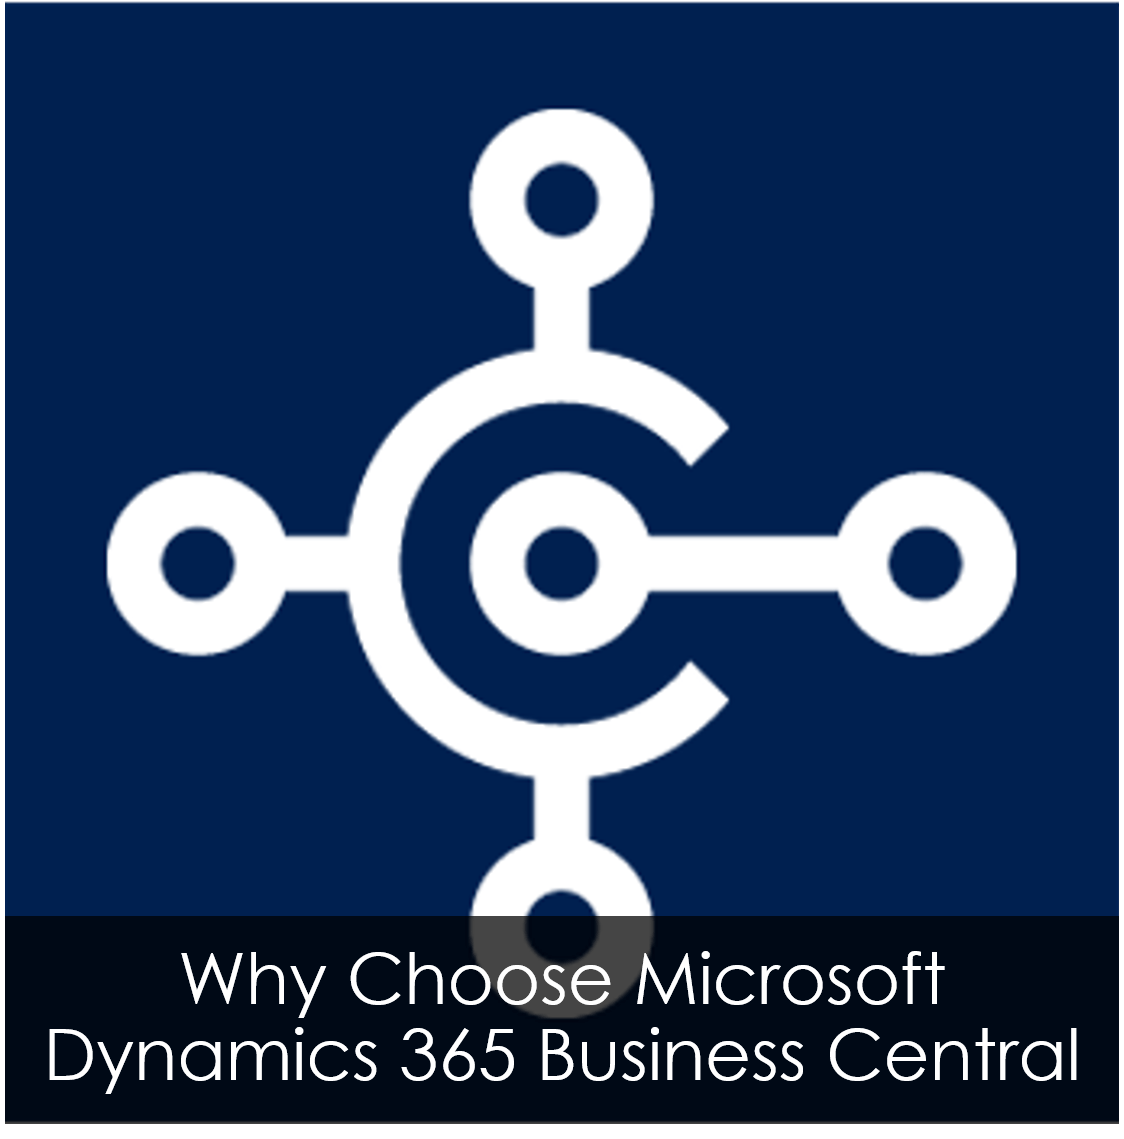 Microsoft Business Logo - Why Choose Microsoft Dynamics 365 Business Central?. ArcherPoint, Inc